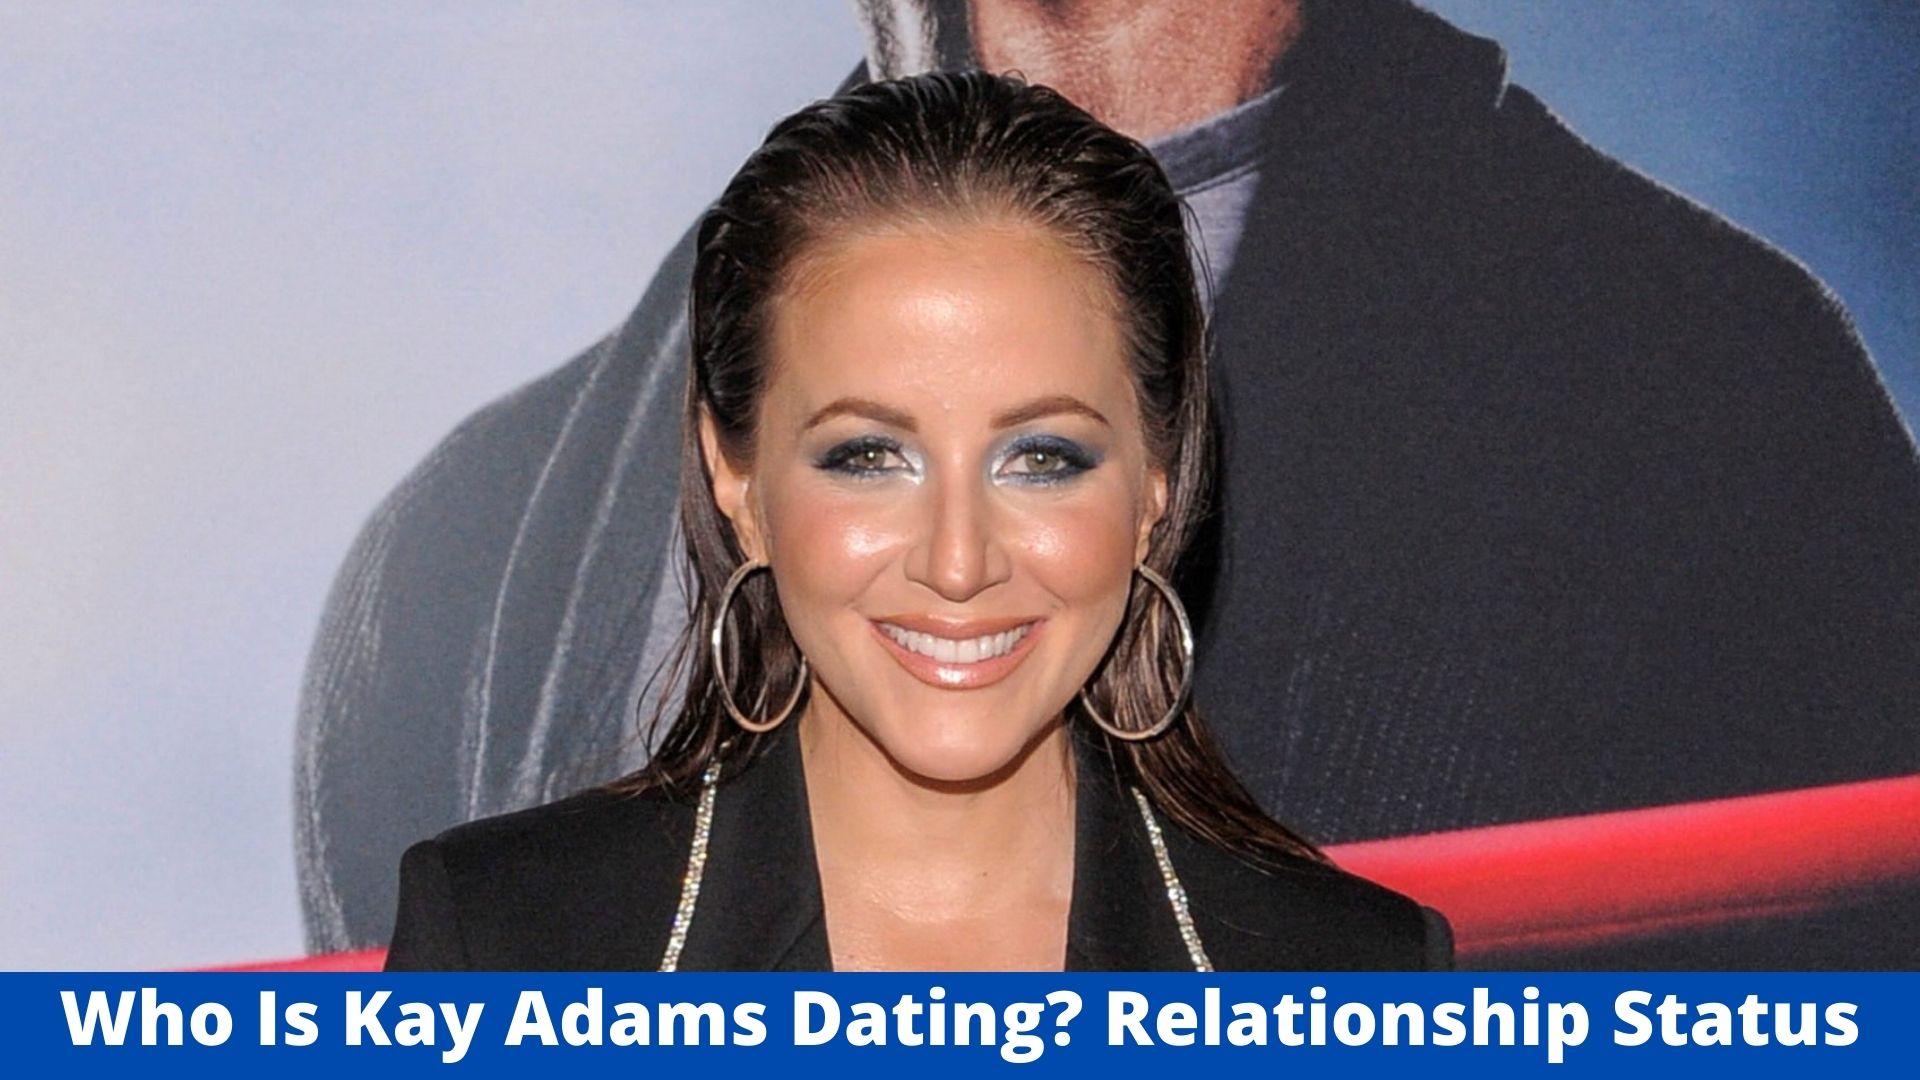 Who Is Kay Adams Dating? Relationship Status